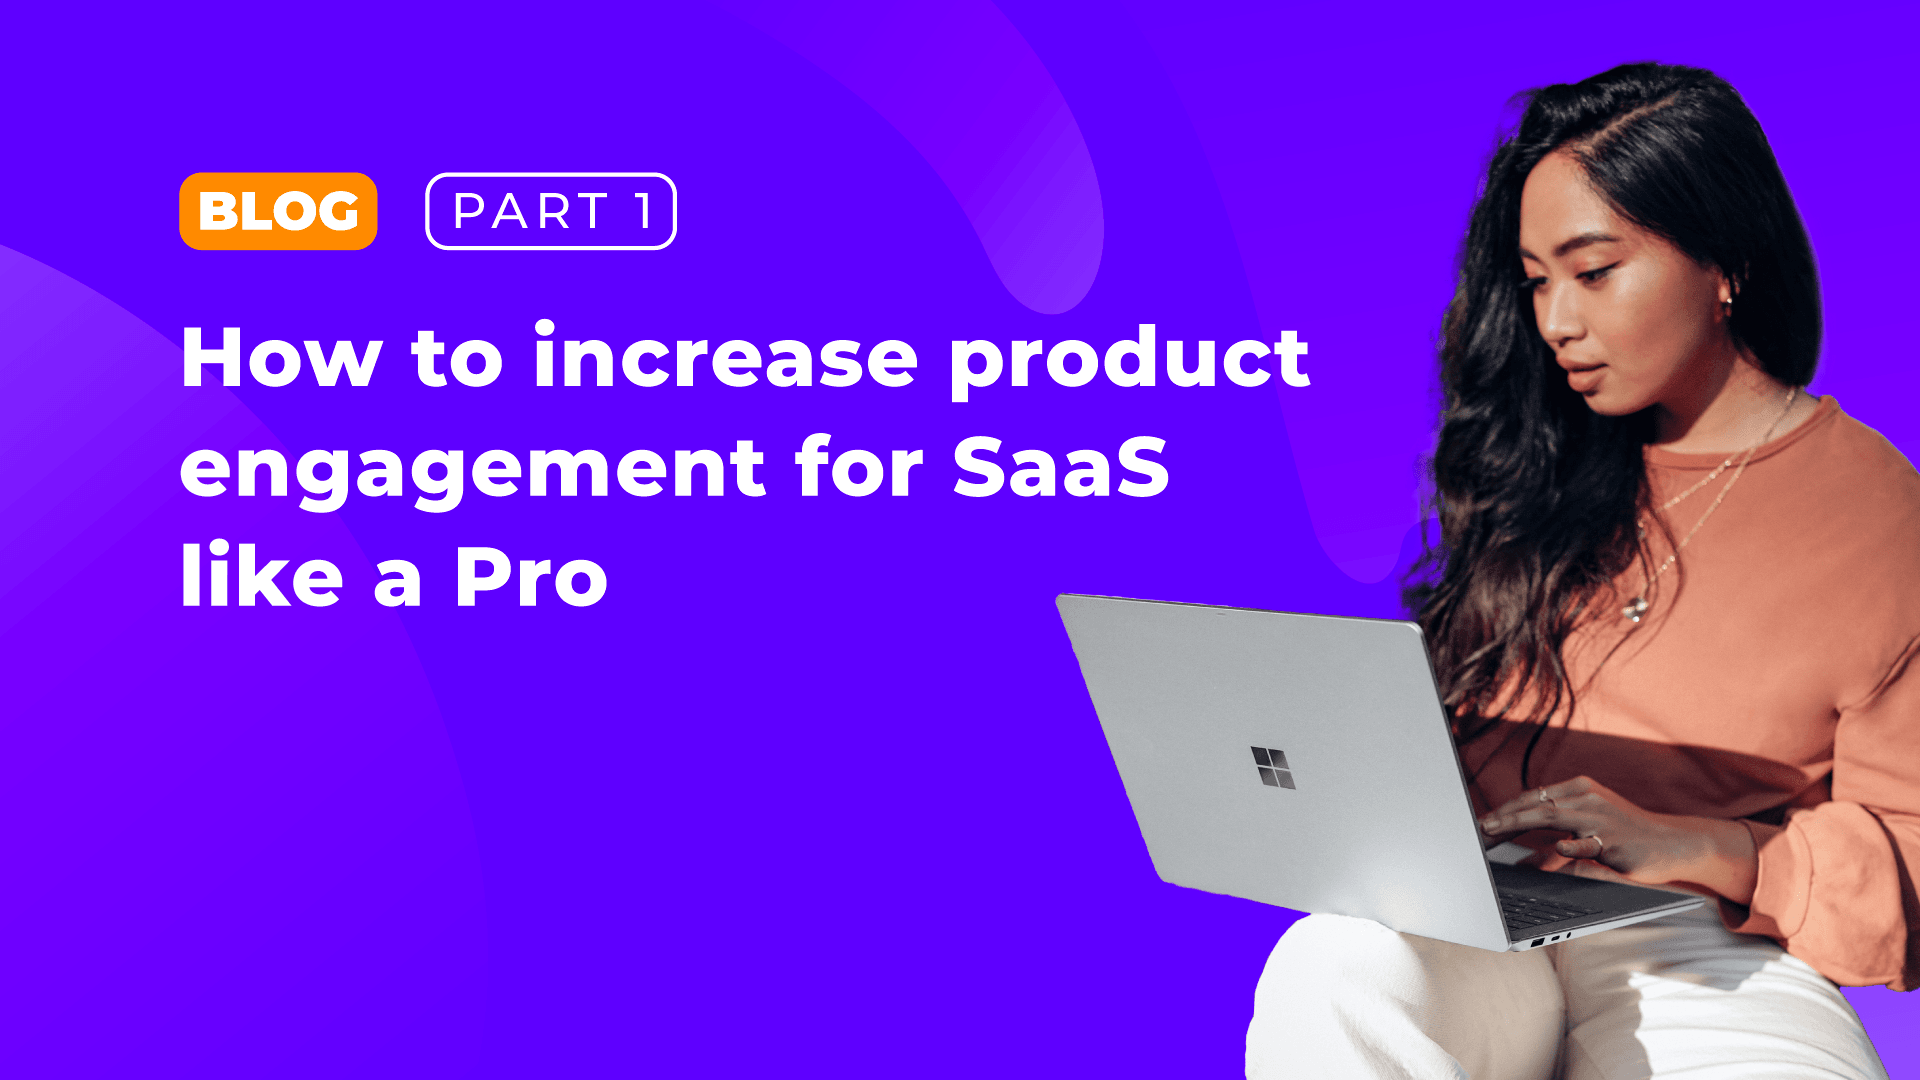 How to increase product engagement for SaaS like a Pro: Part 1 cover